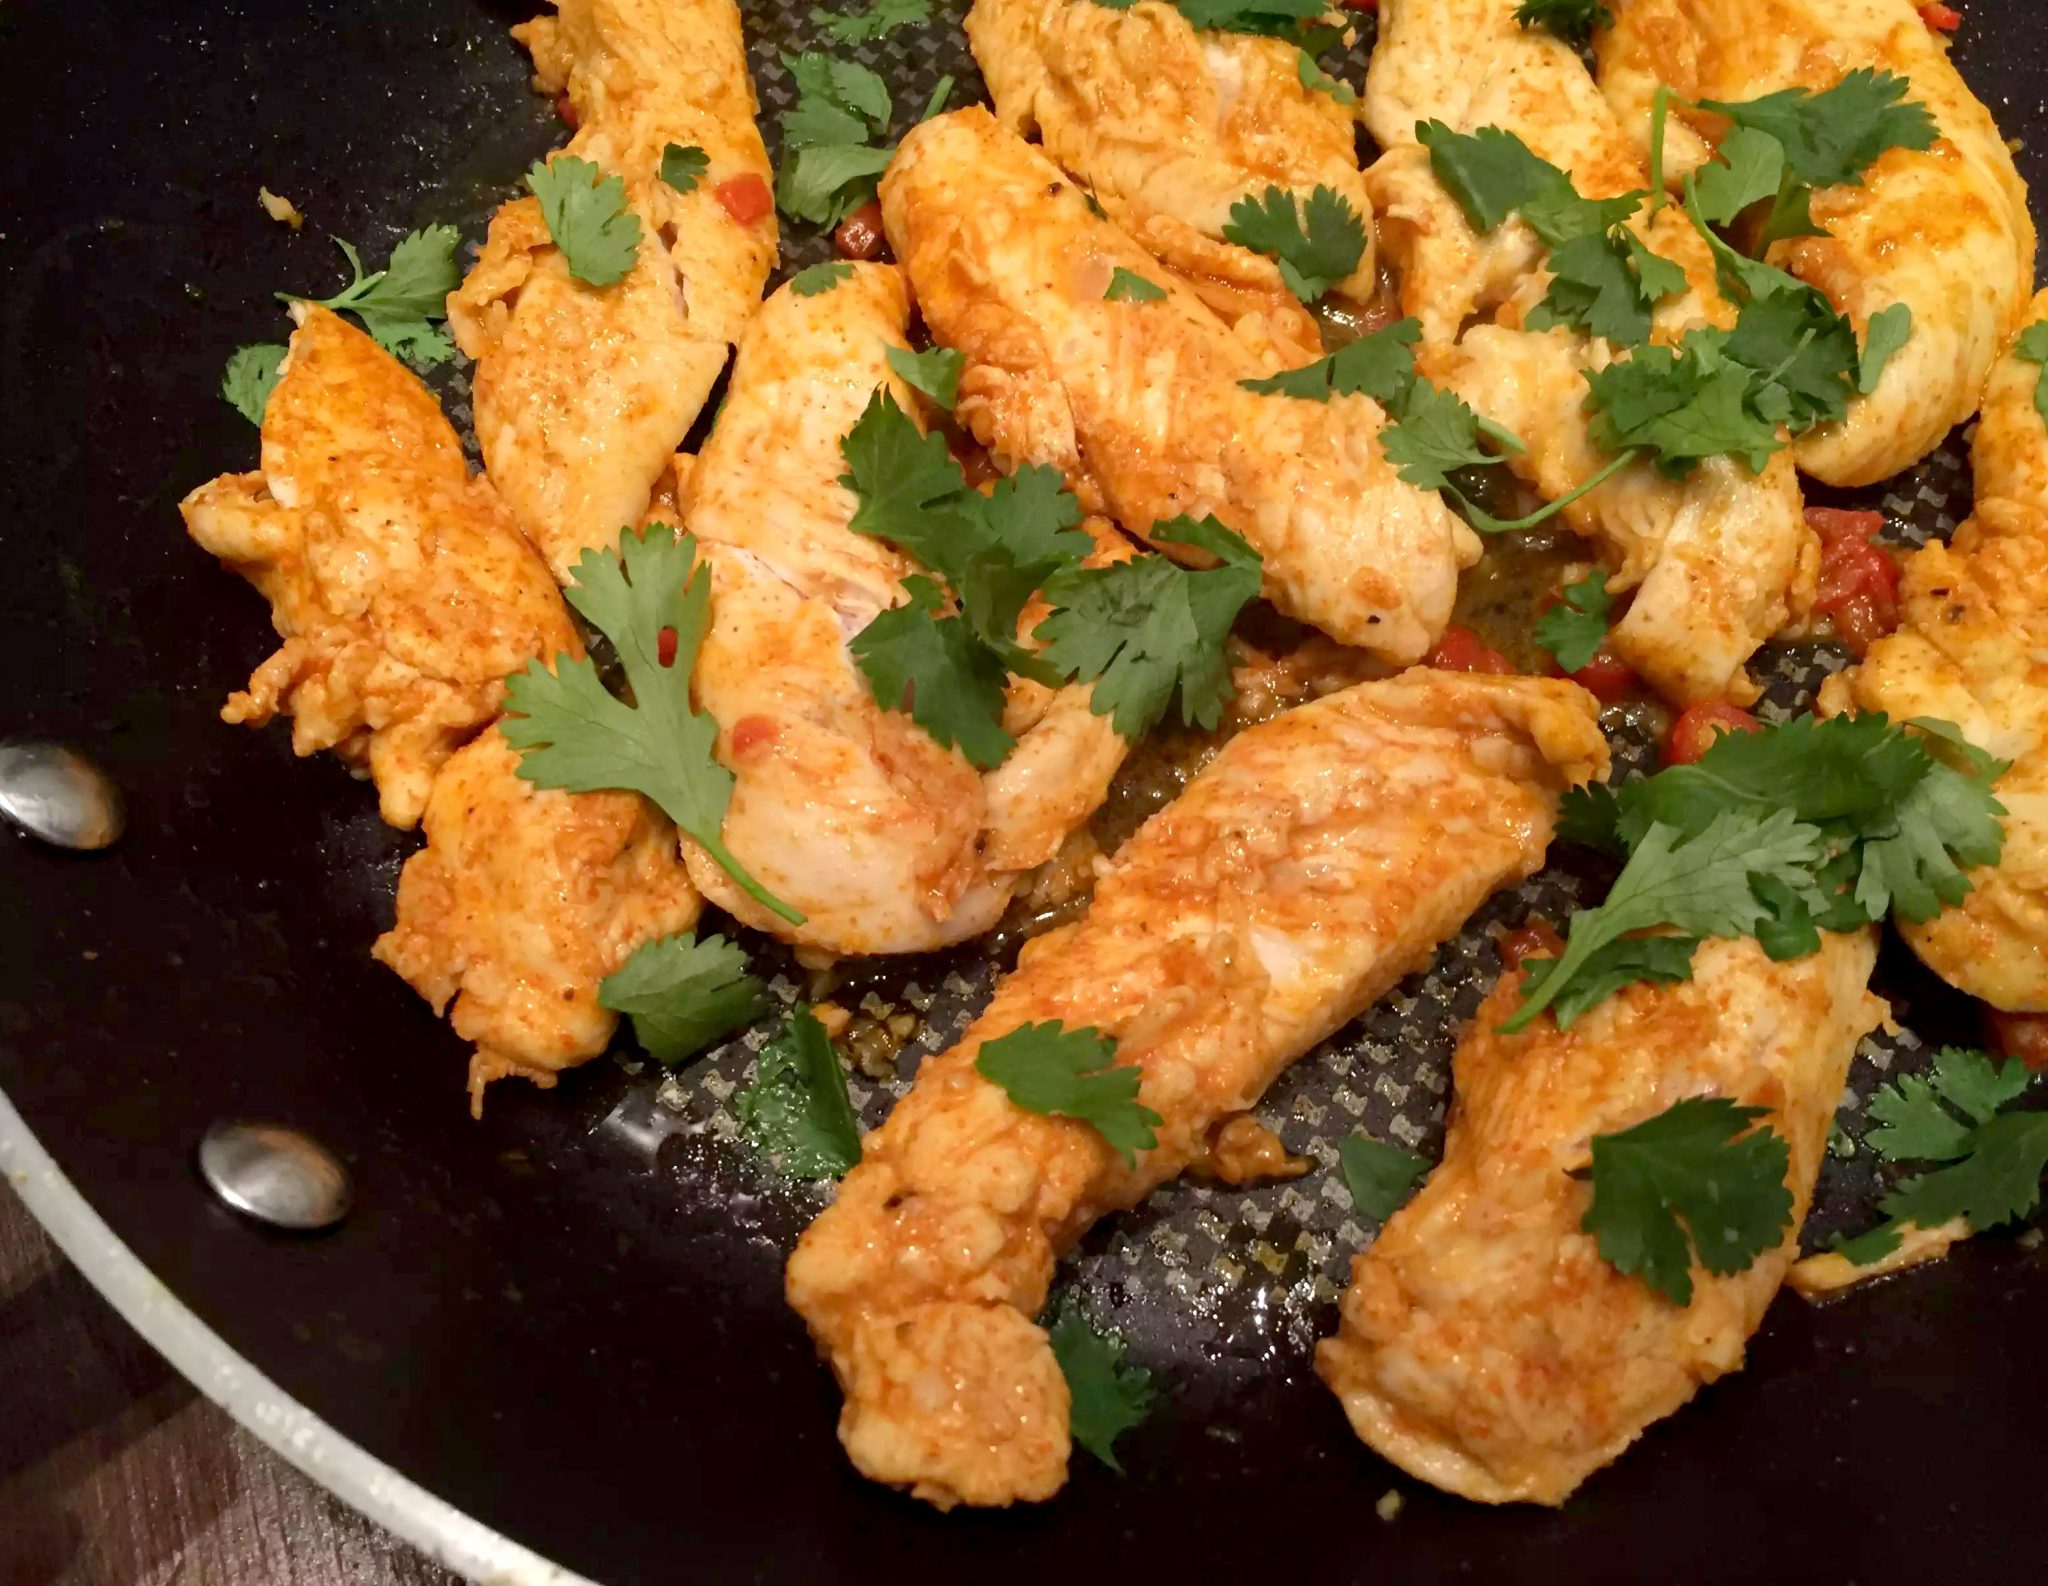 Lime & Paprika marinated Chicken from Emma Eats & Explores - SCD, Paleo, Dairy-Free, Gluten-Free, Grain-Free, Sugar-Free, Clean-Eating